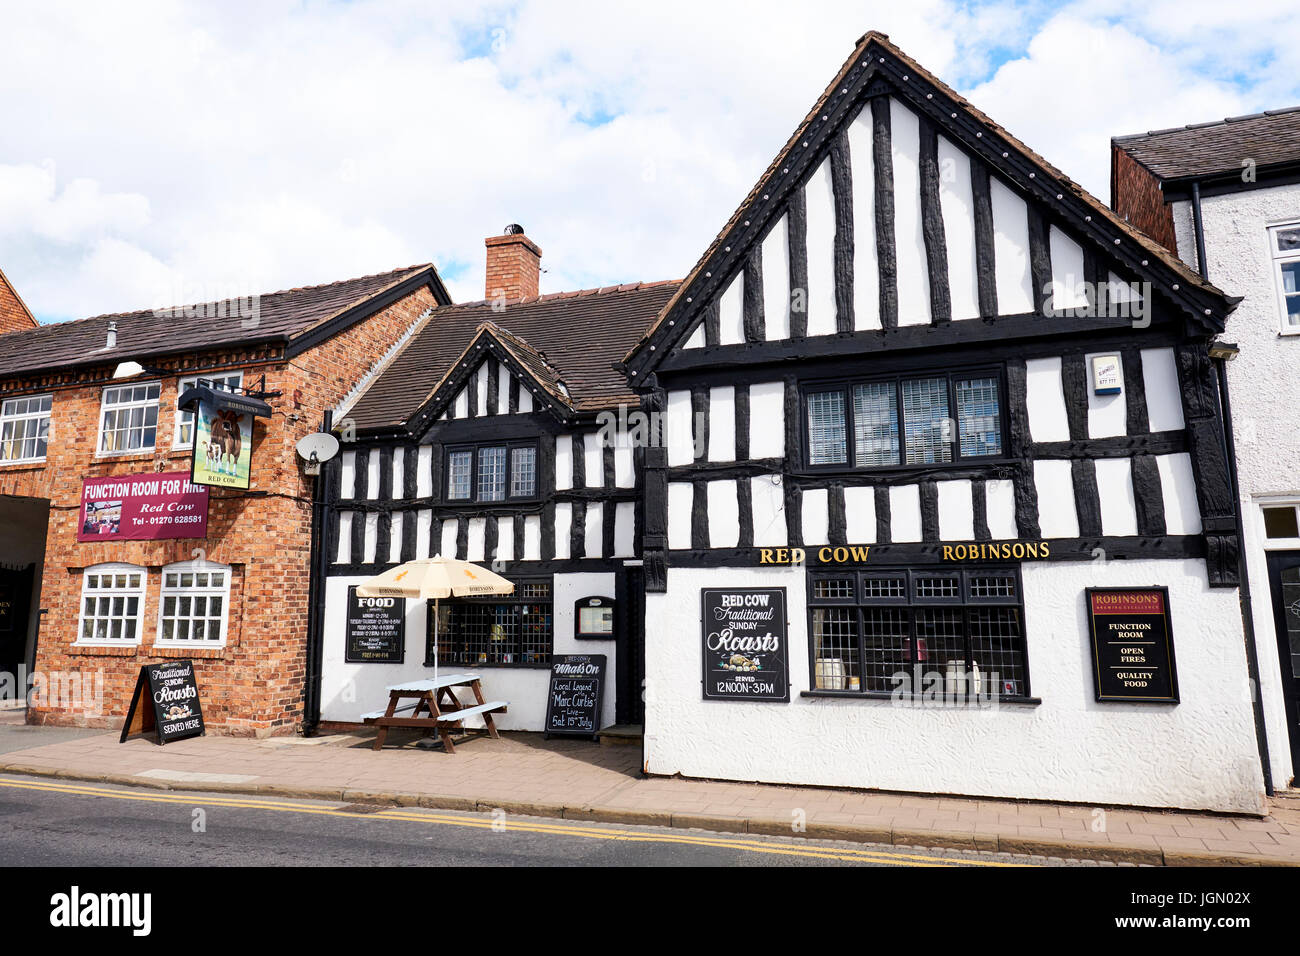 The Red Cow Public House A 15th Century Coaching Inn, Beam Street, Nantwich, Cheshire, UK Stock Photo